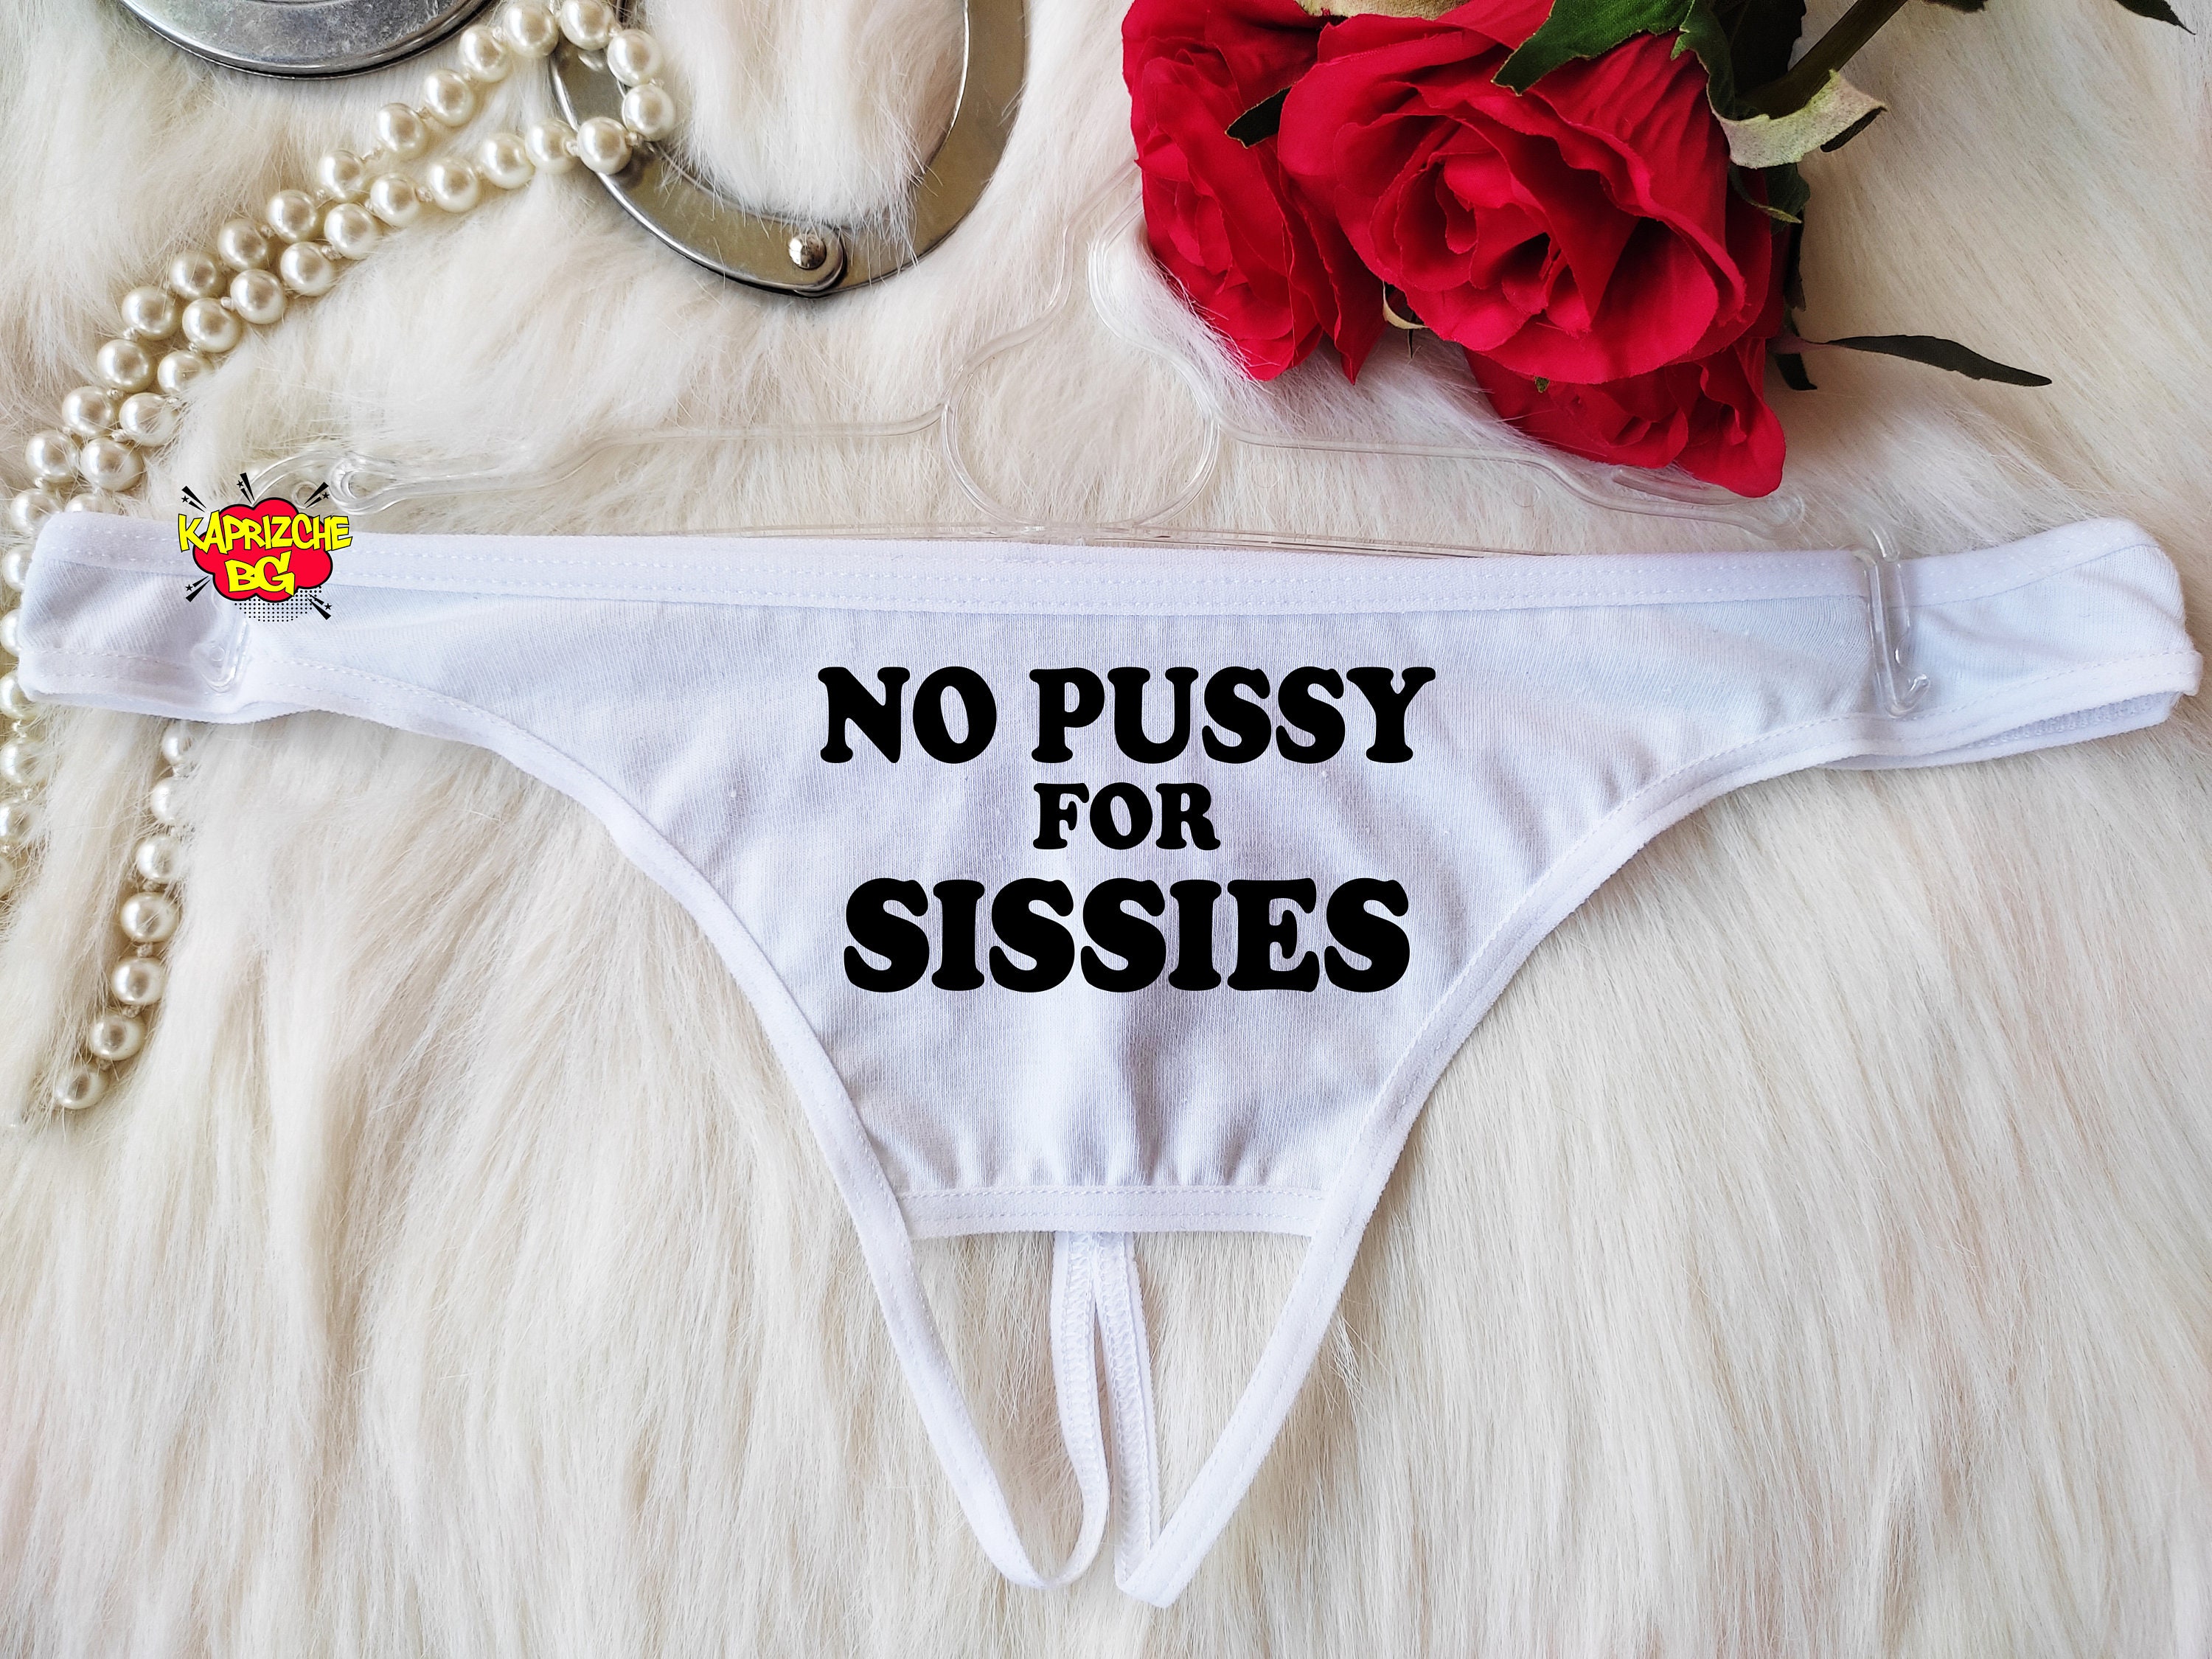 afiq adam recommends No Pussy For Sissy